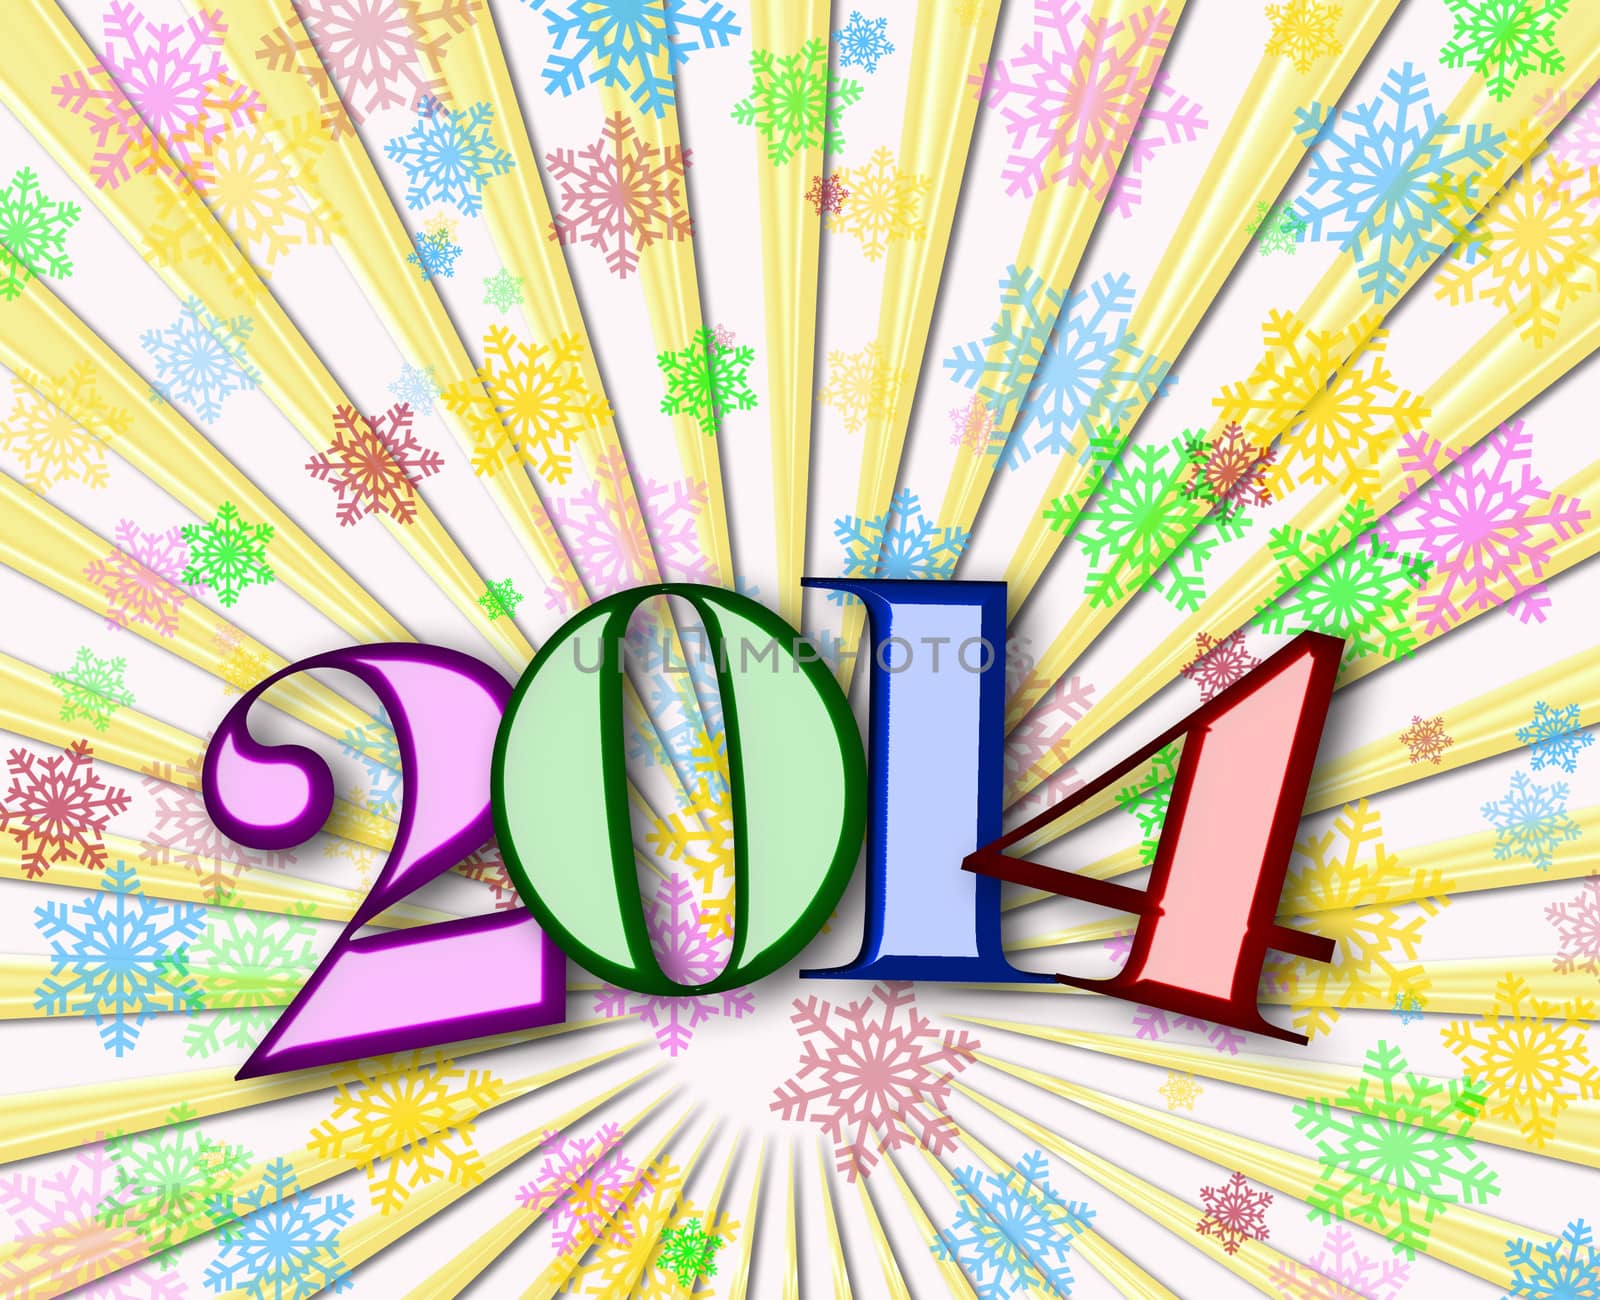 Happy New Year 2014 background with colorful snowflakes by Dddaca